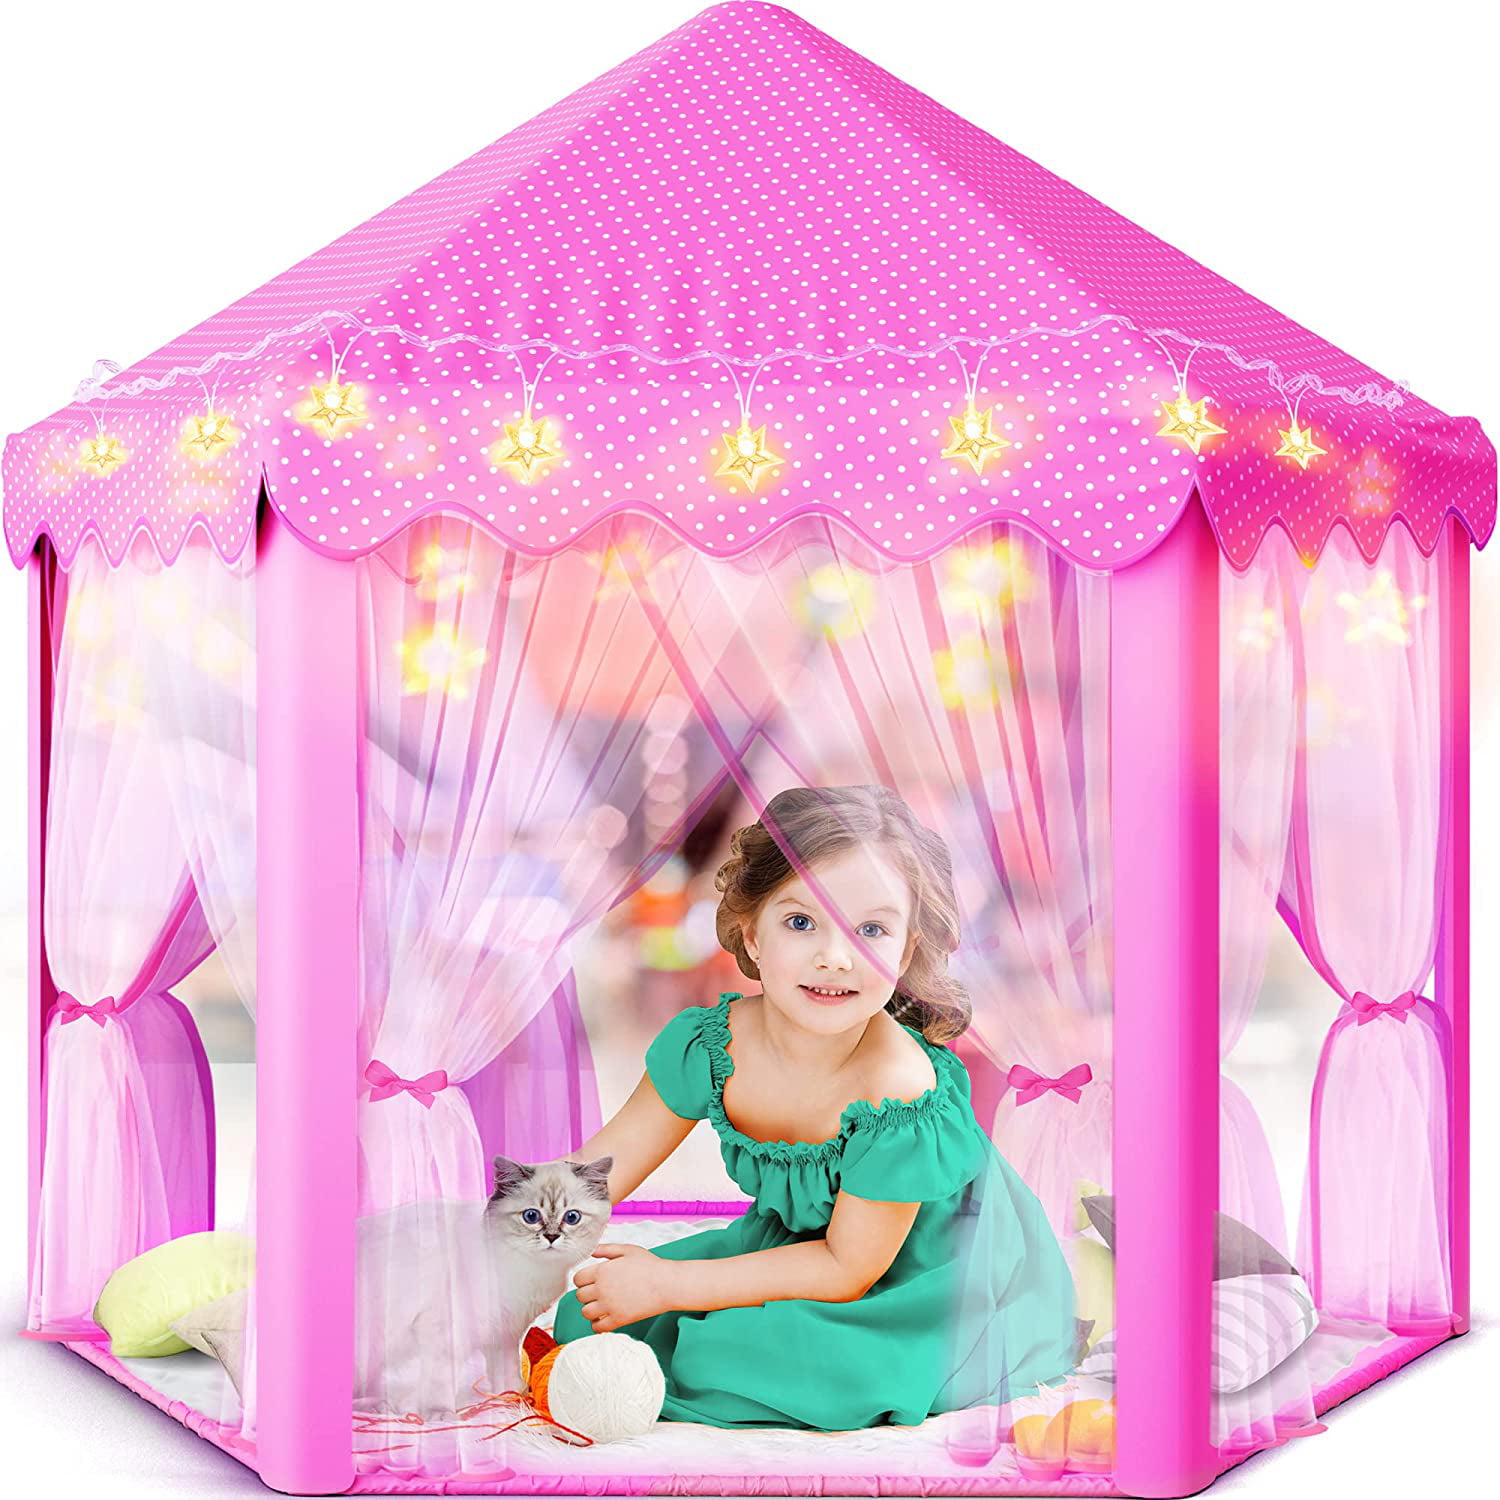 Pericross Girl Princess Castle Style Play House Kids Play Tent for Reading Room Pink 